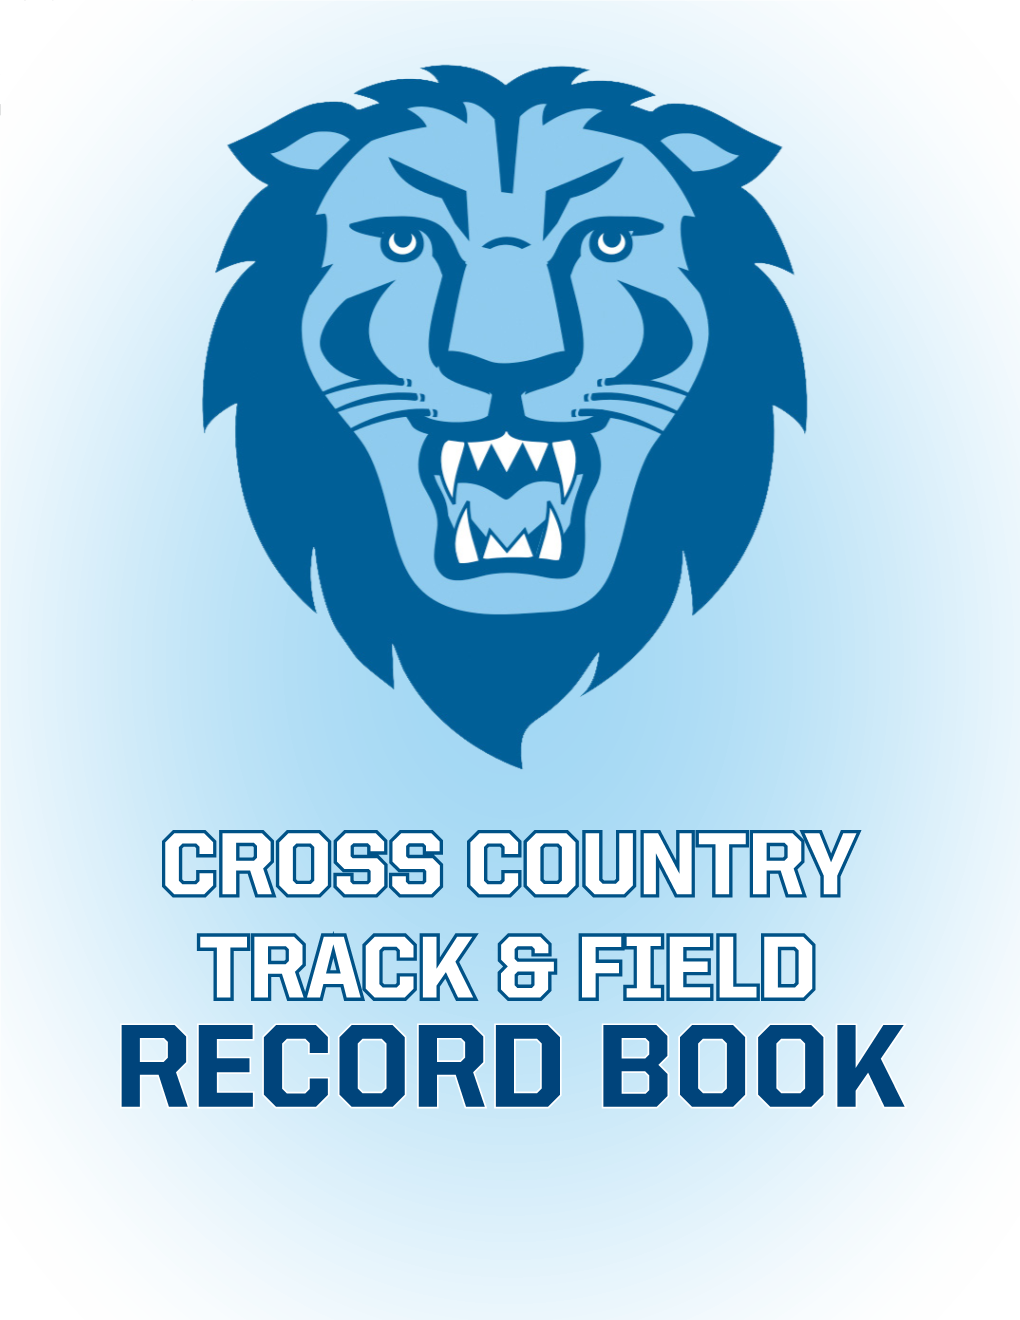 Cross Country Track & Field